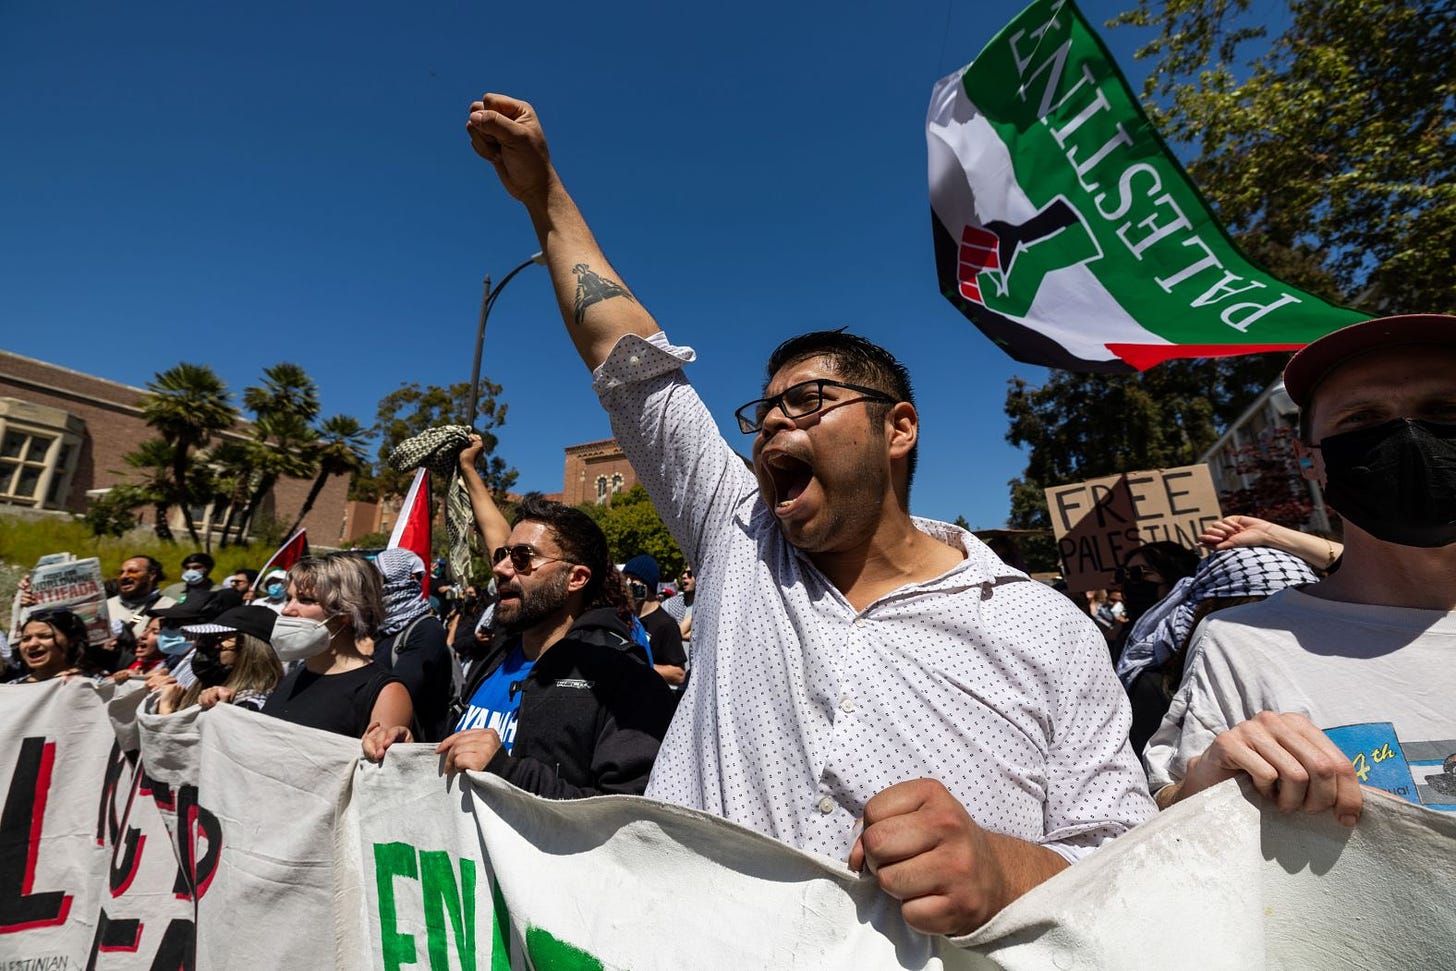 In pictures: Pro-Palestinian protests spread at US colleges | CNN